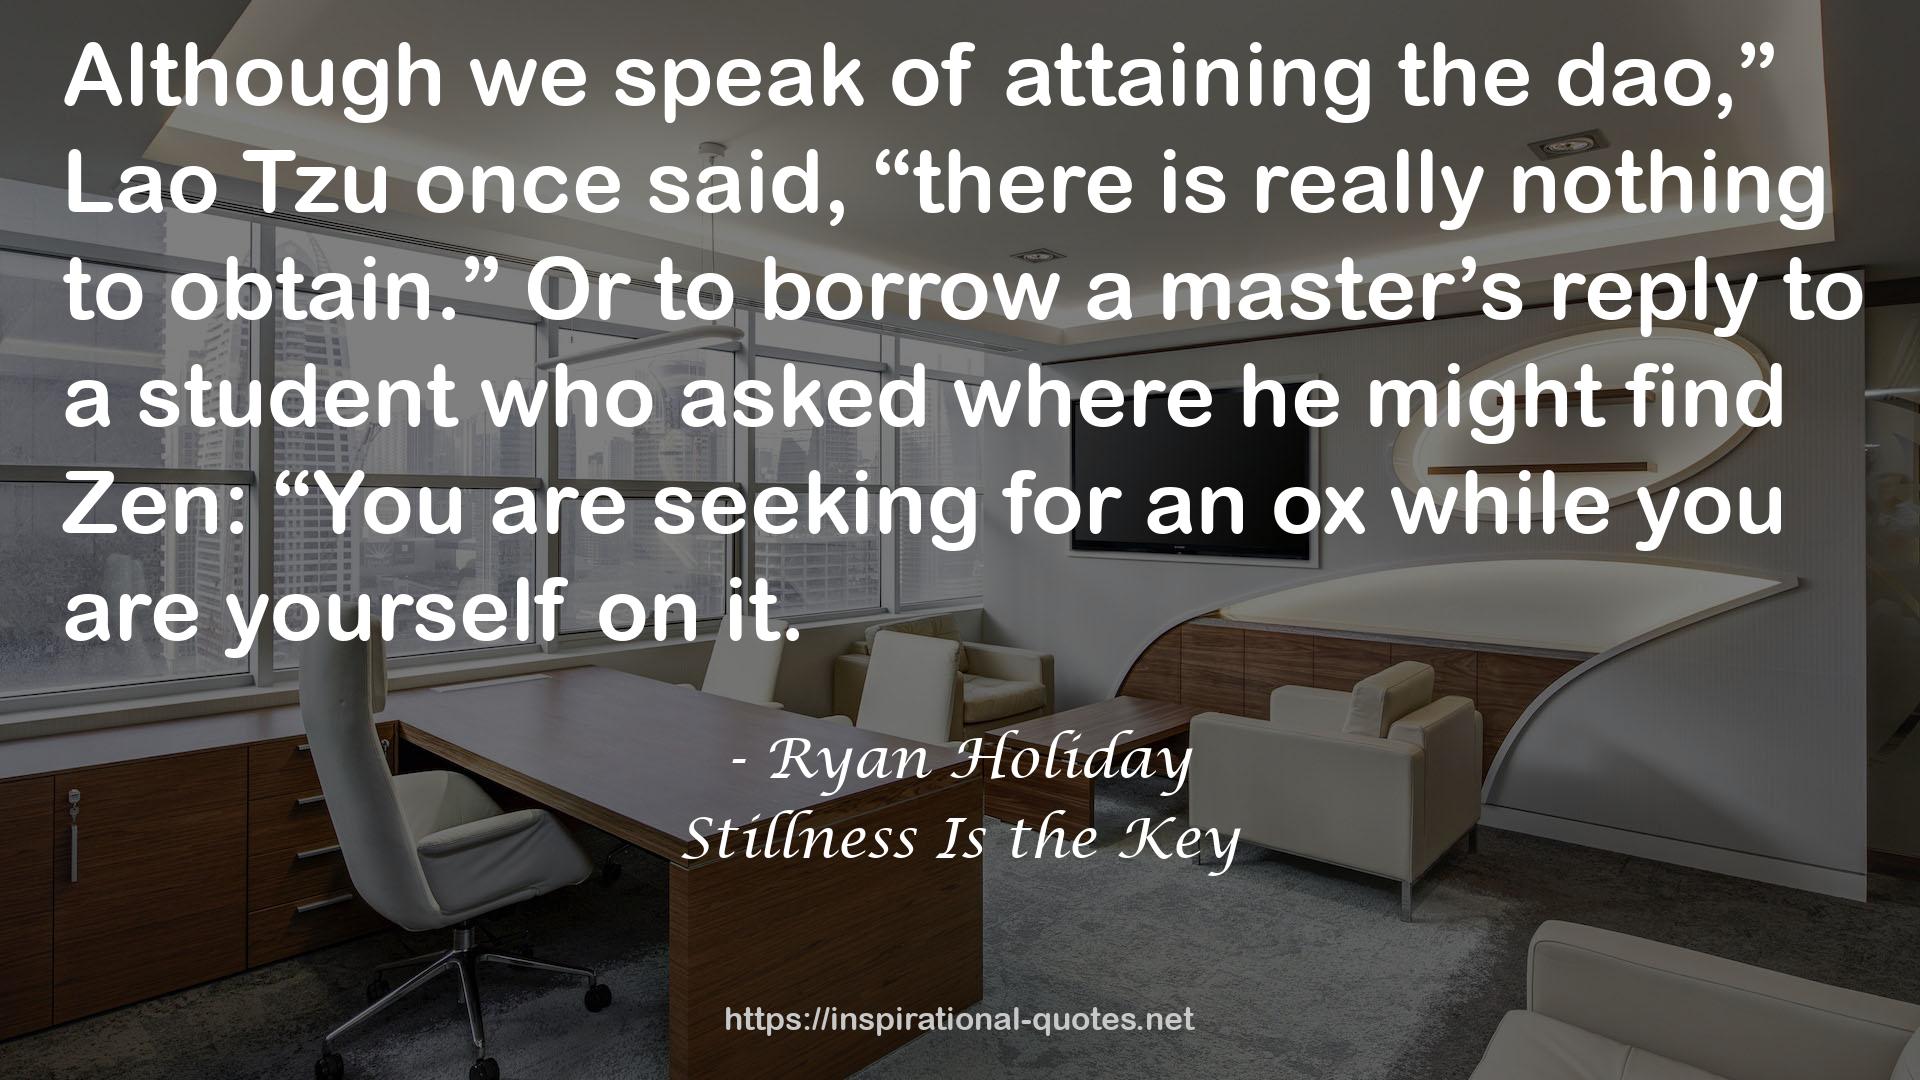 Stillness Is the Key QUOTES